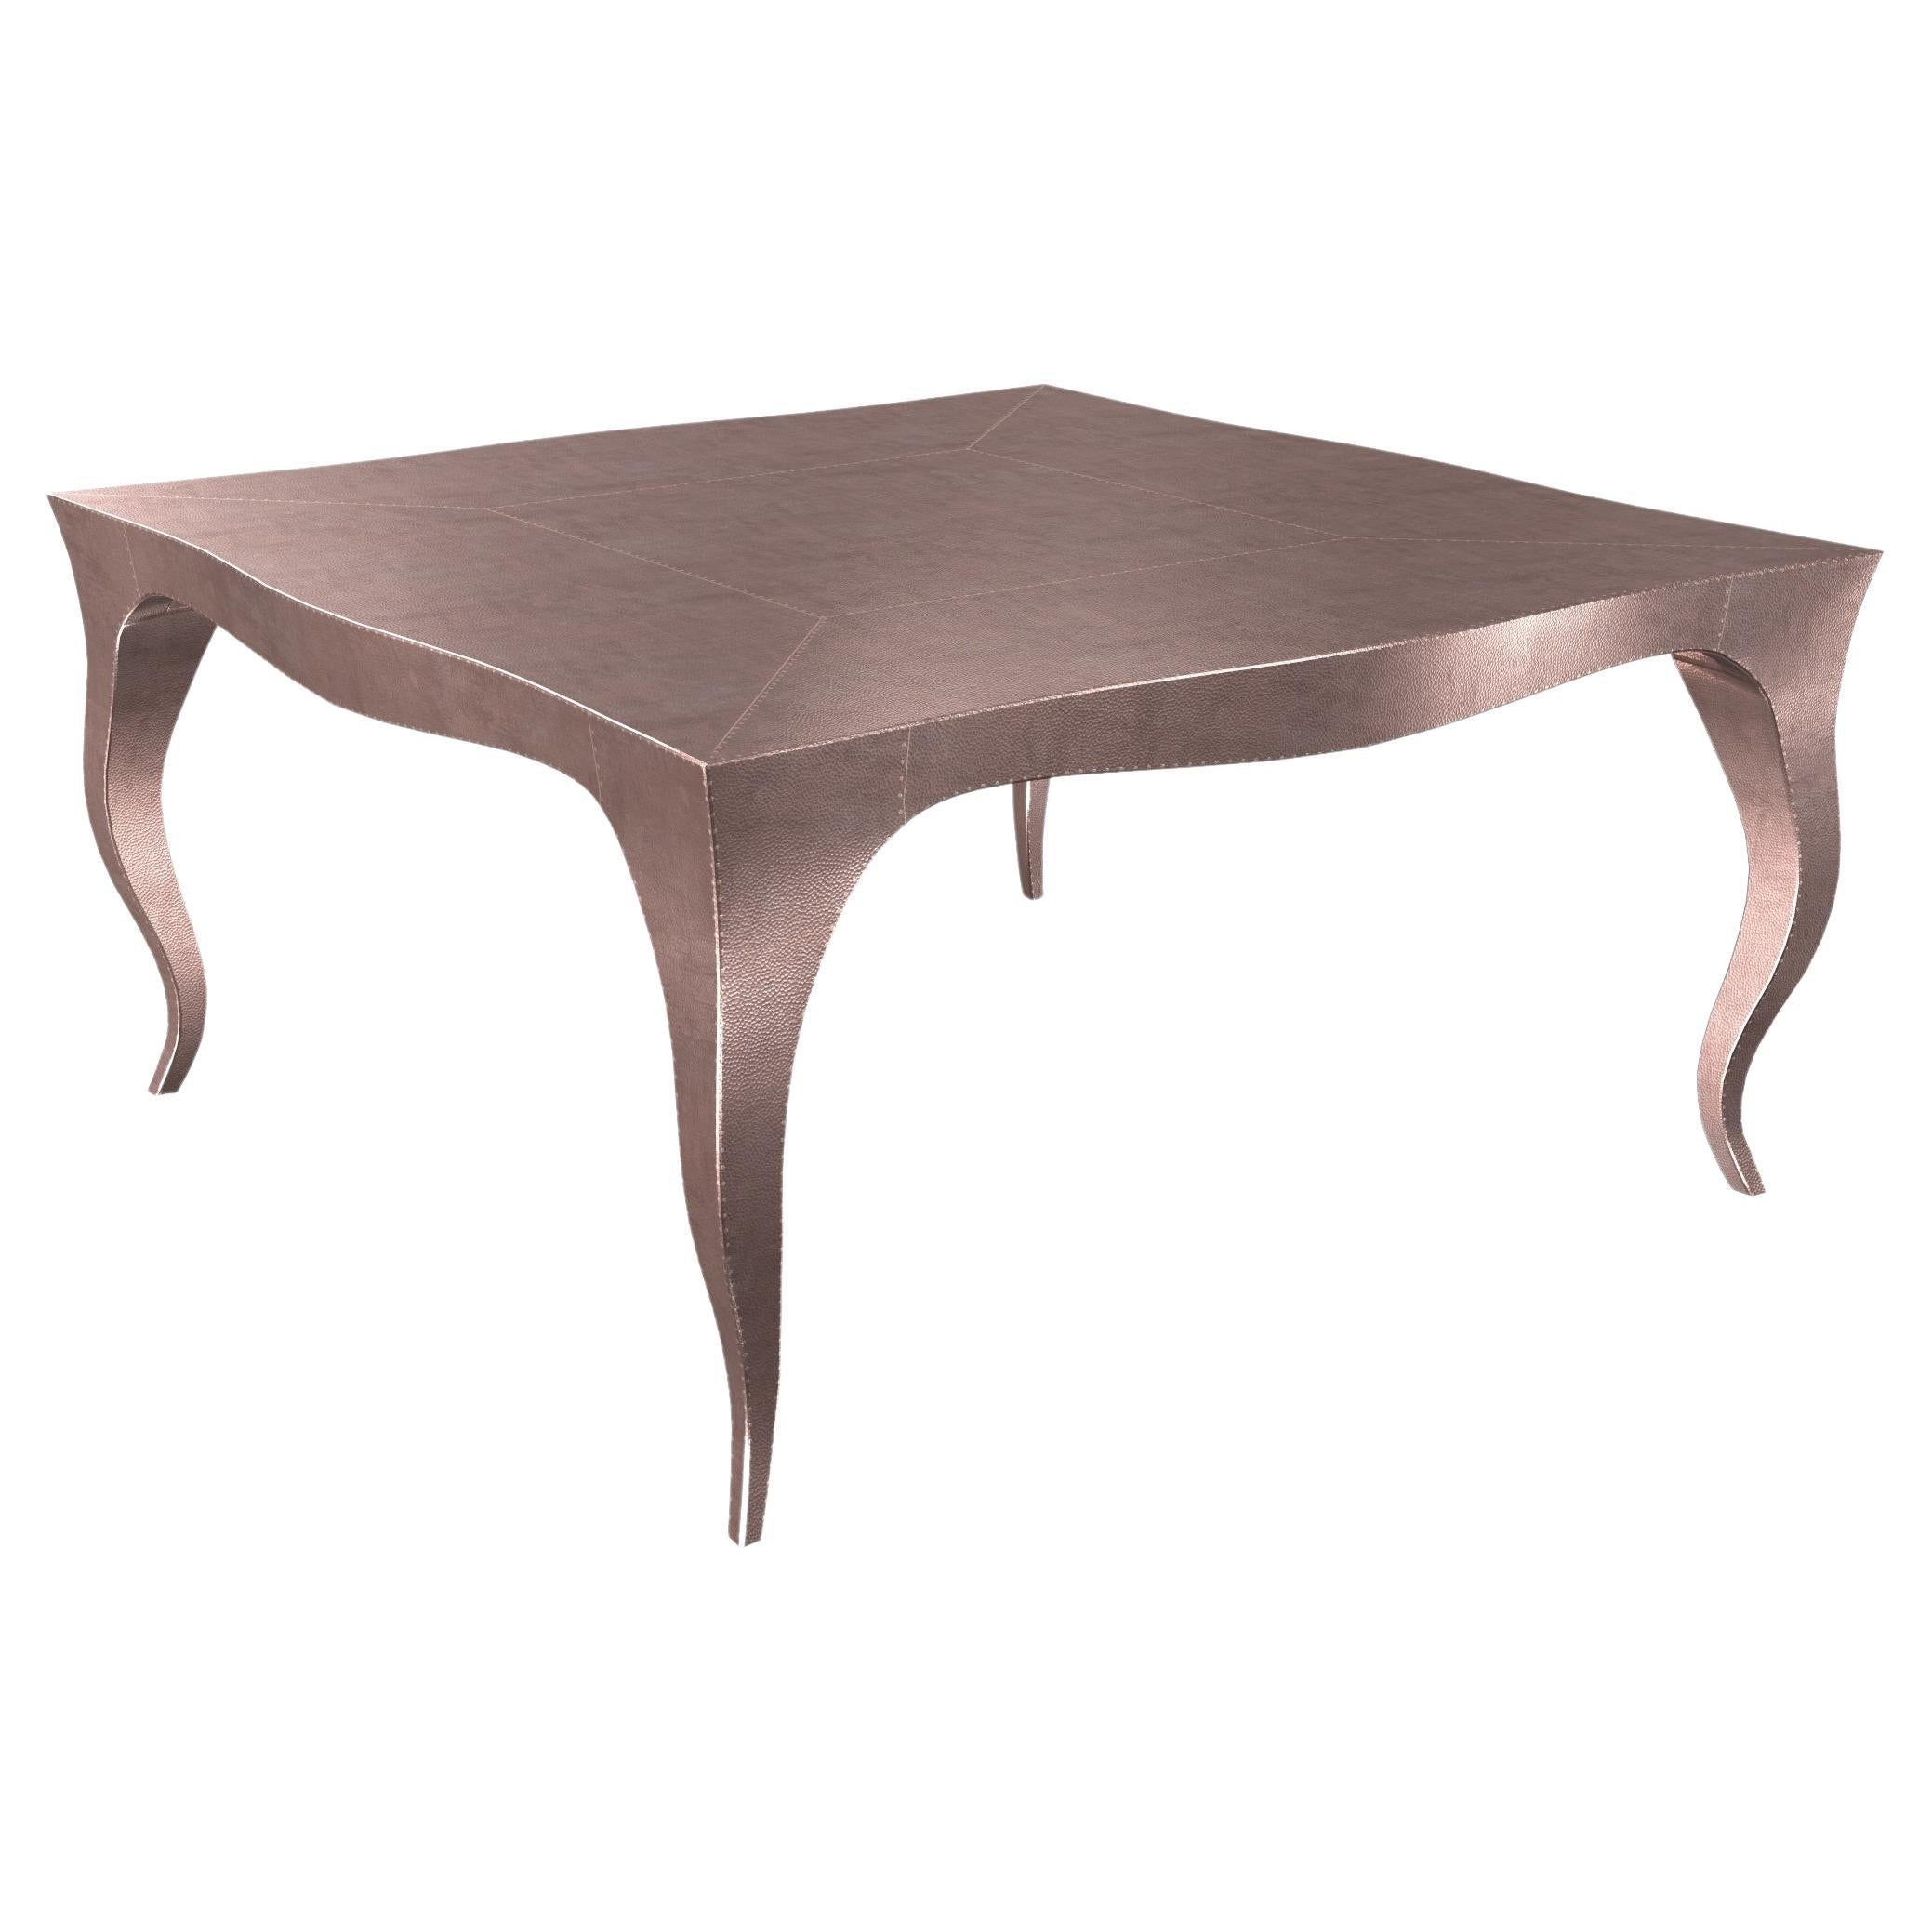 Louise Art Deco Nesting Tables Mid. Hammered Copper 18.5x18.5x10 inch by Paul M.